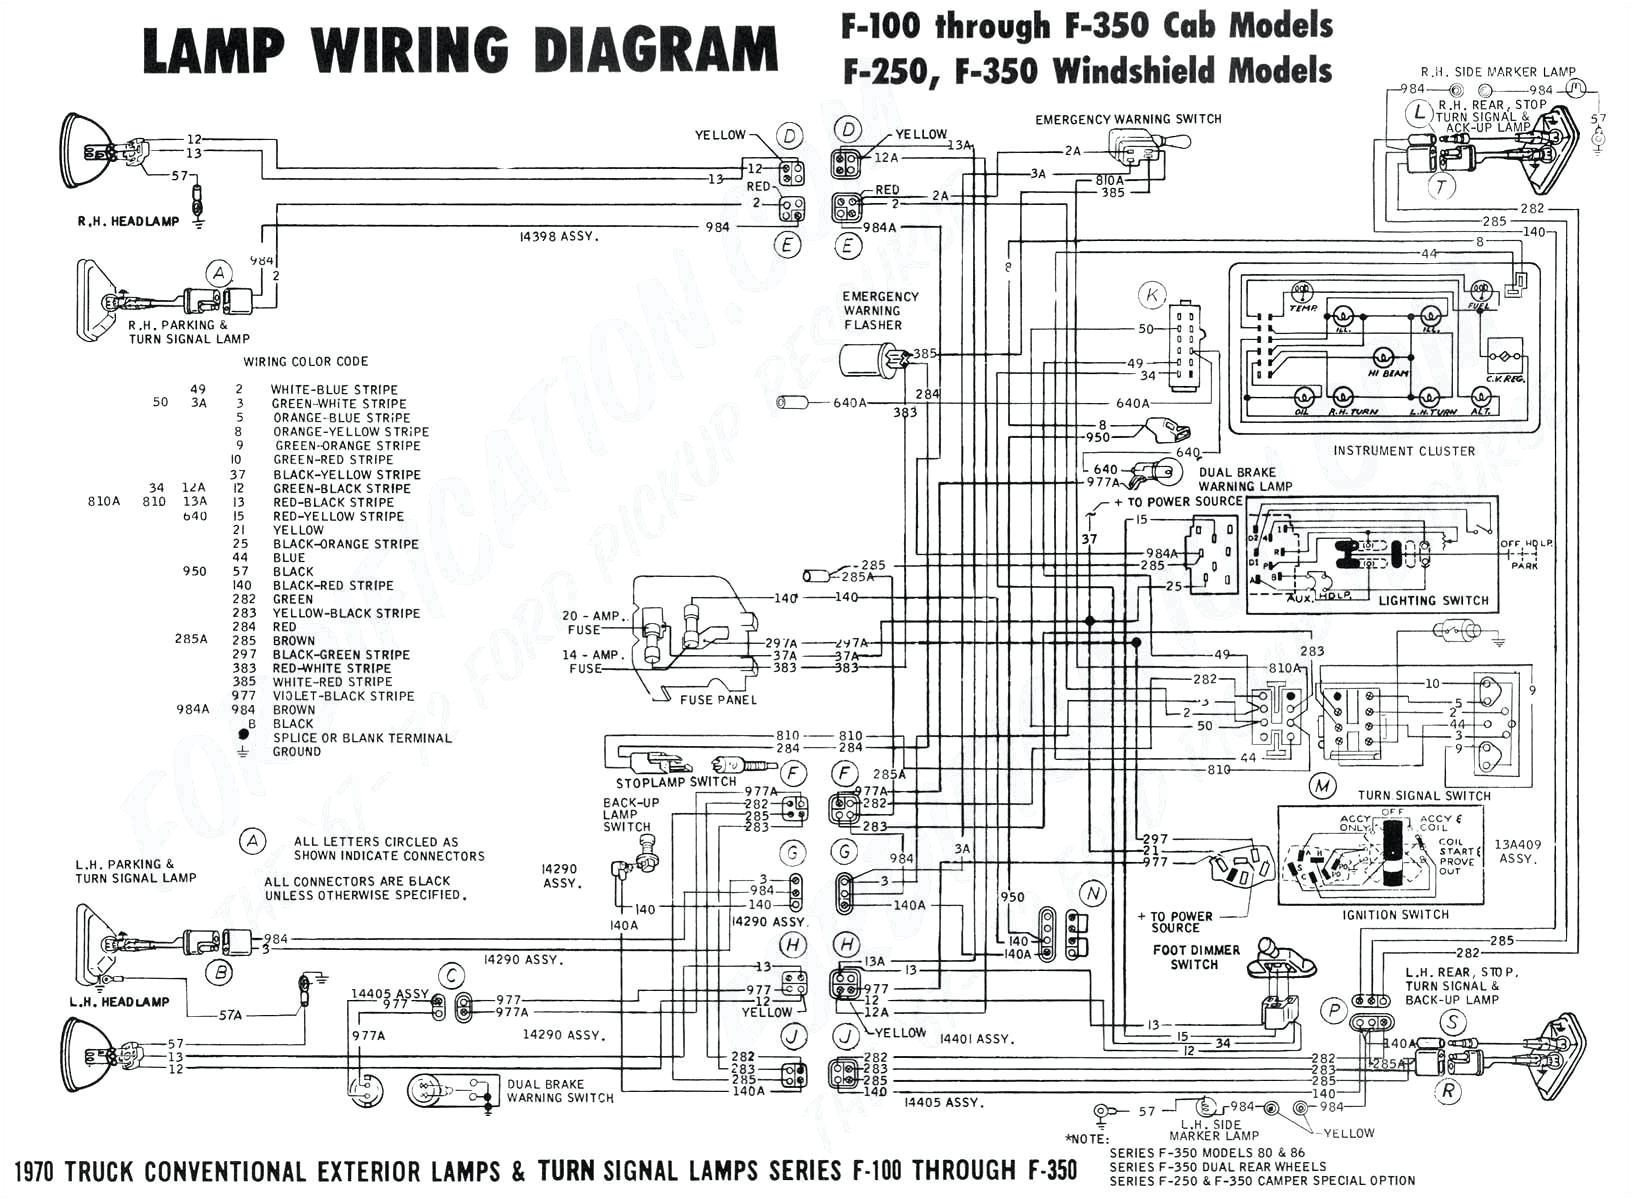 Sony Cdx Gt565up Wiring Diagram 1988 Mustang Engine Diagram Wiring Diagram Load